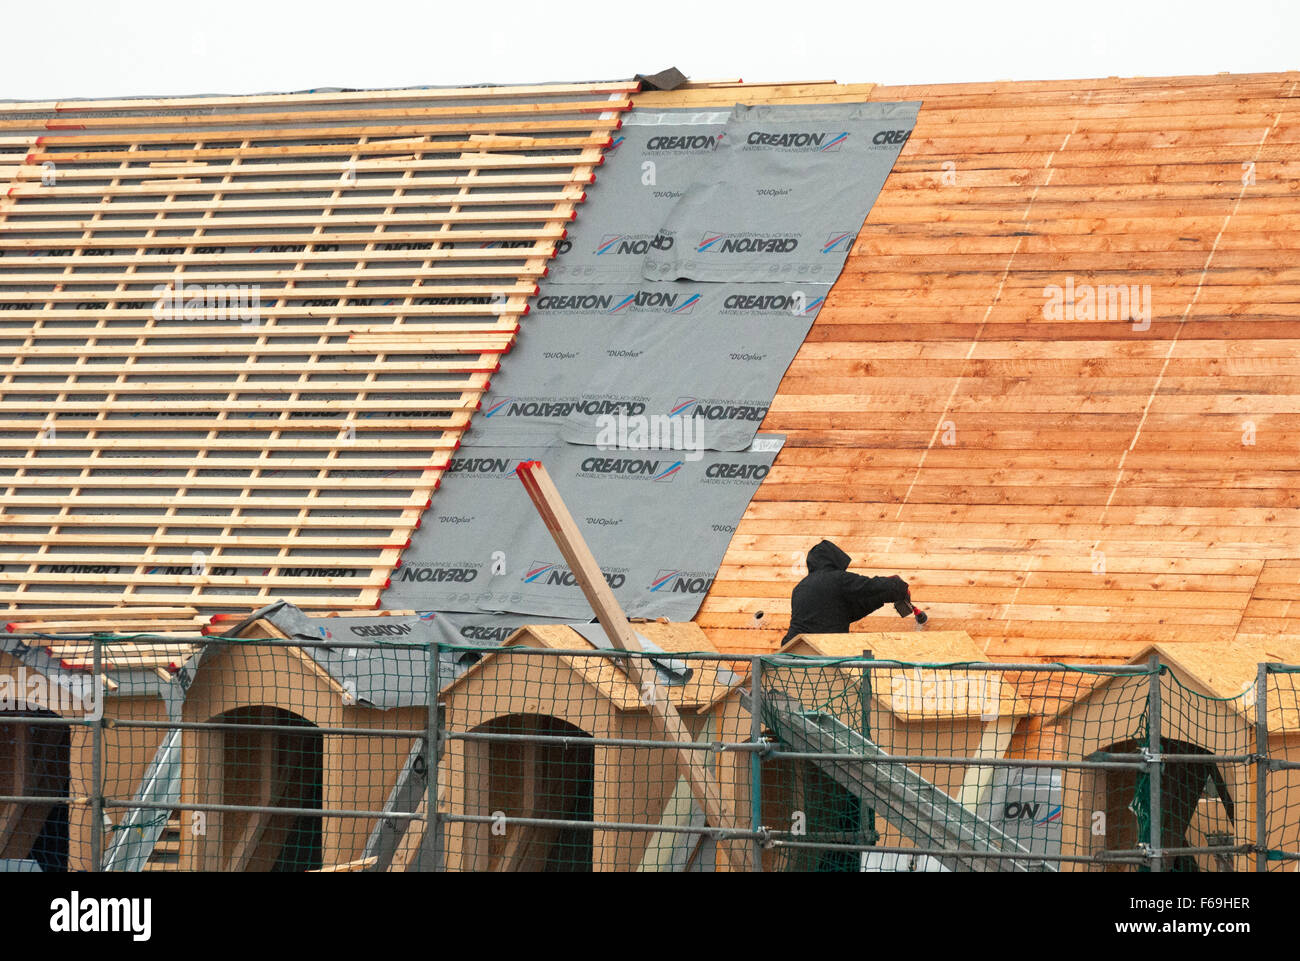 Builder recreating historic pitched roofing style in Dresden, Germany Stock Photo